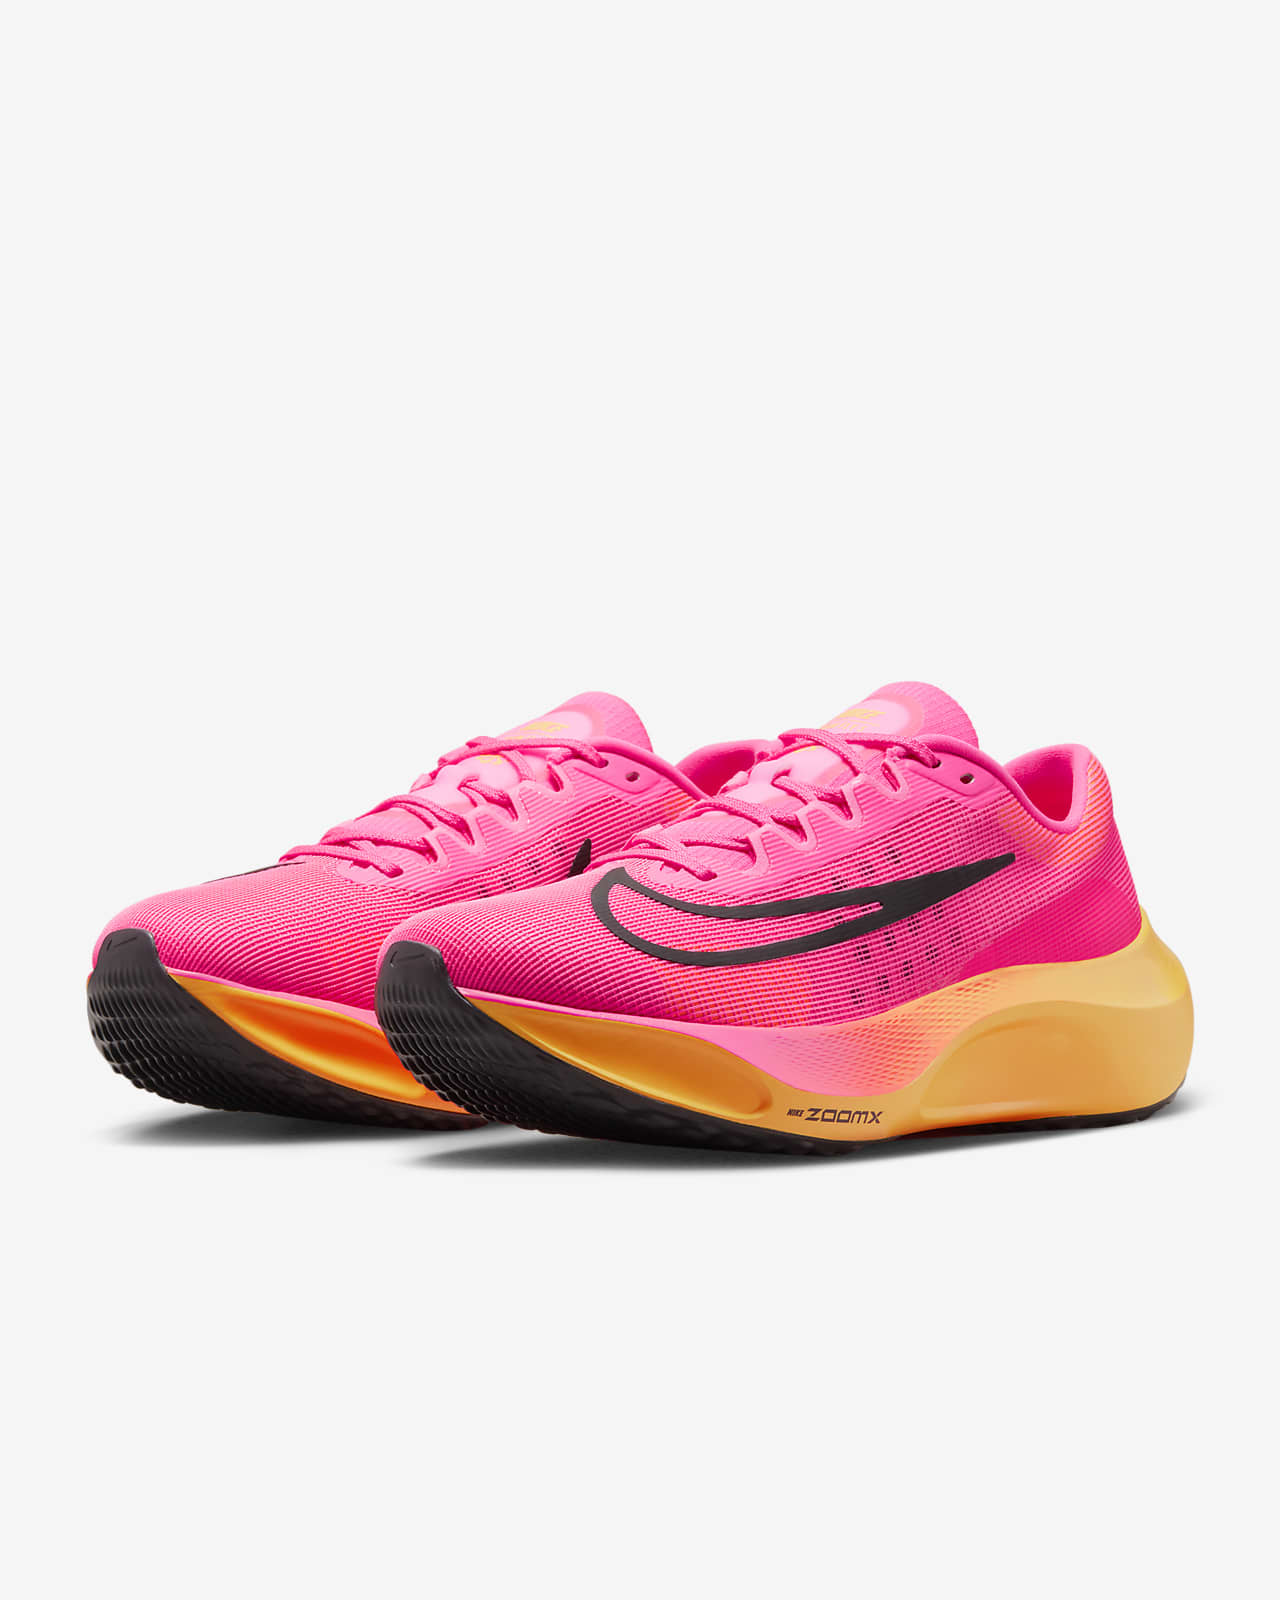 nike zoom fly 5 men's running shoes